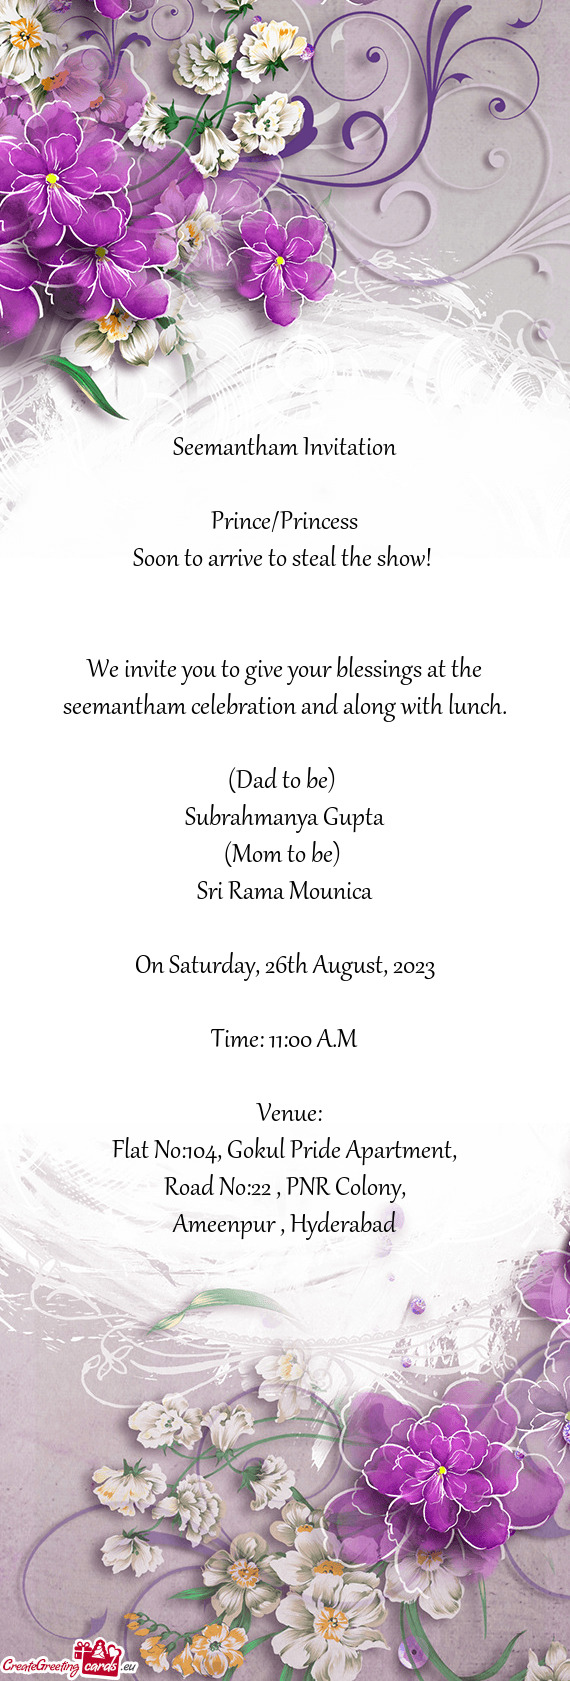 We invite you to give your blessings at the seemantham celebration and along with lunch